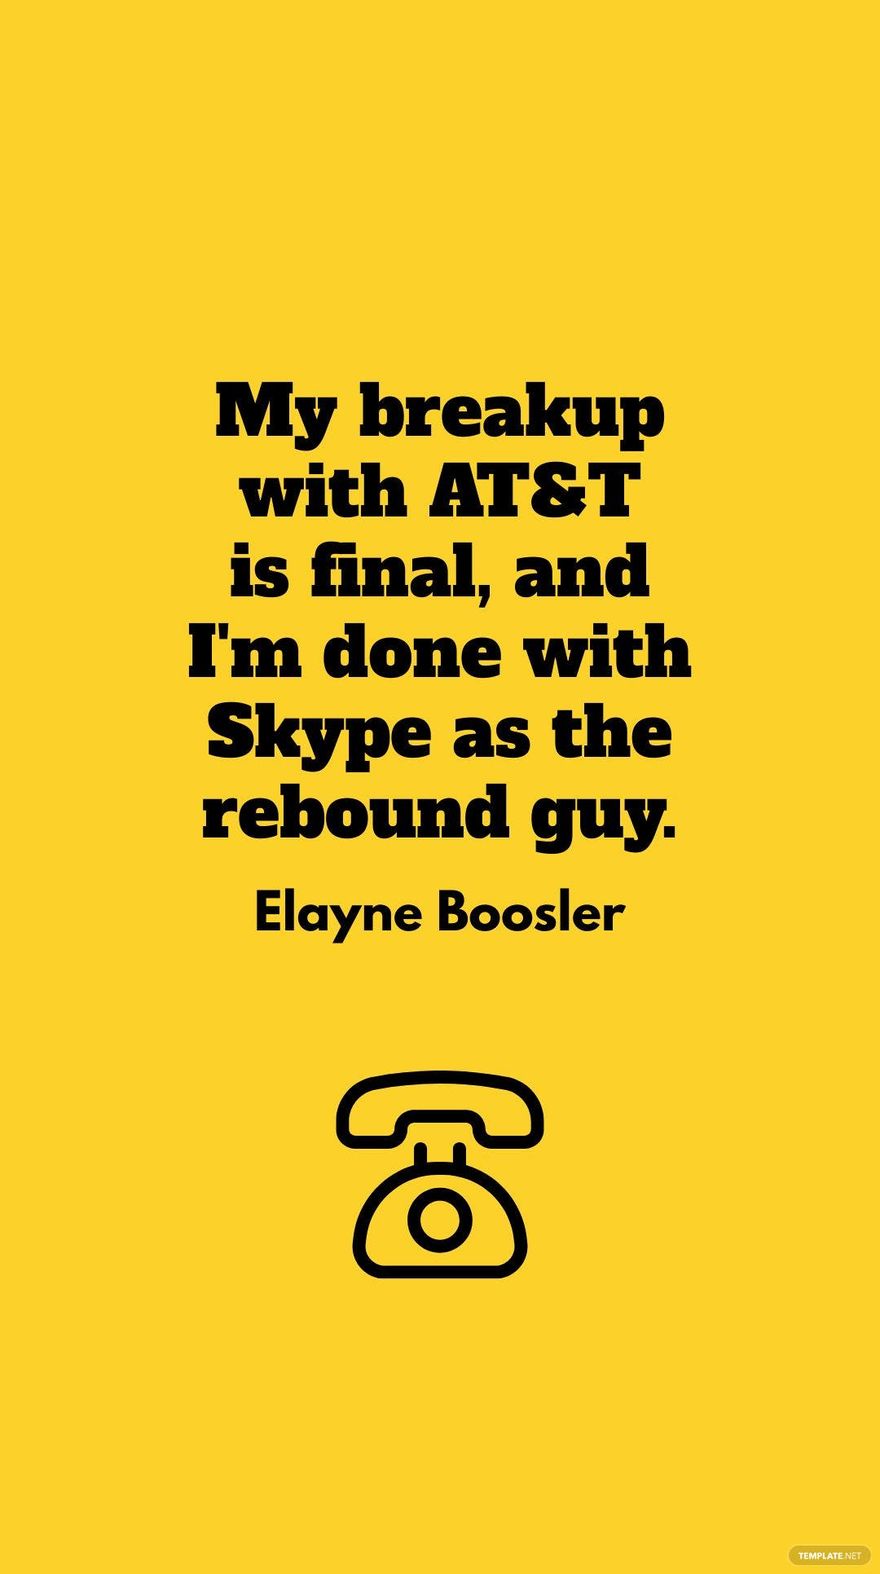 Free Elayne Boosler - My breakup with AT&T is final, and I'm done with Skype as the rebound guy. in JPG